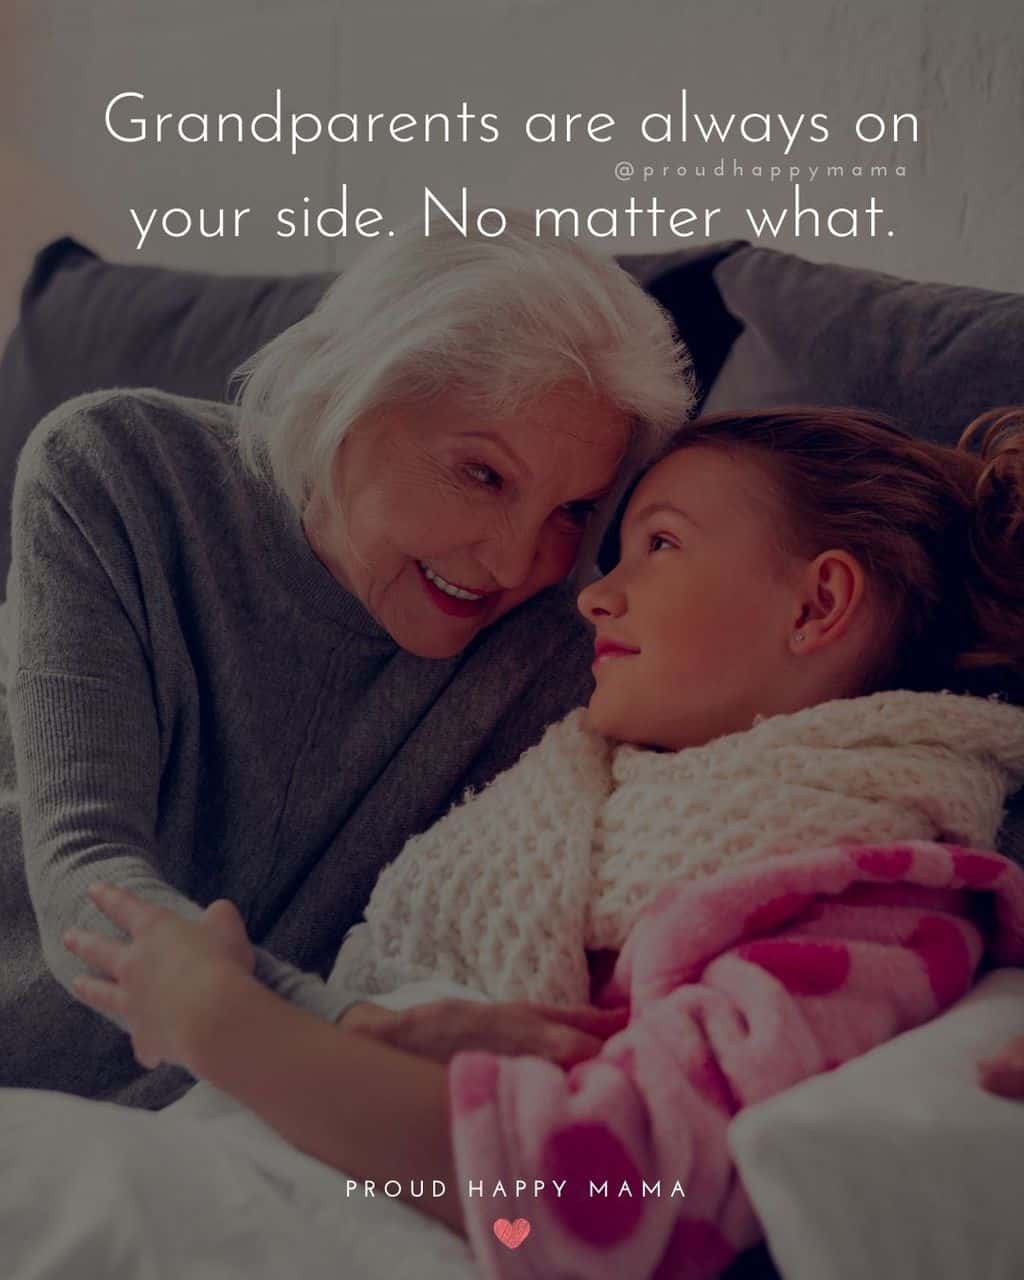 Grandparent Quotes – Grandparents are always on your side. No matter what.’